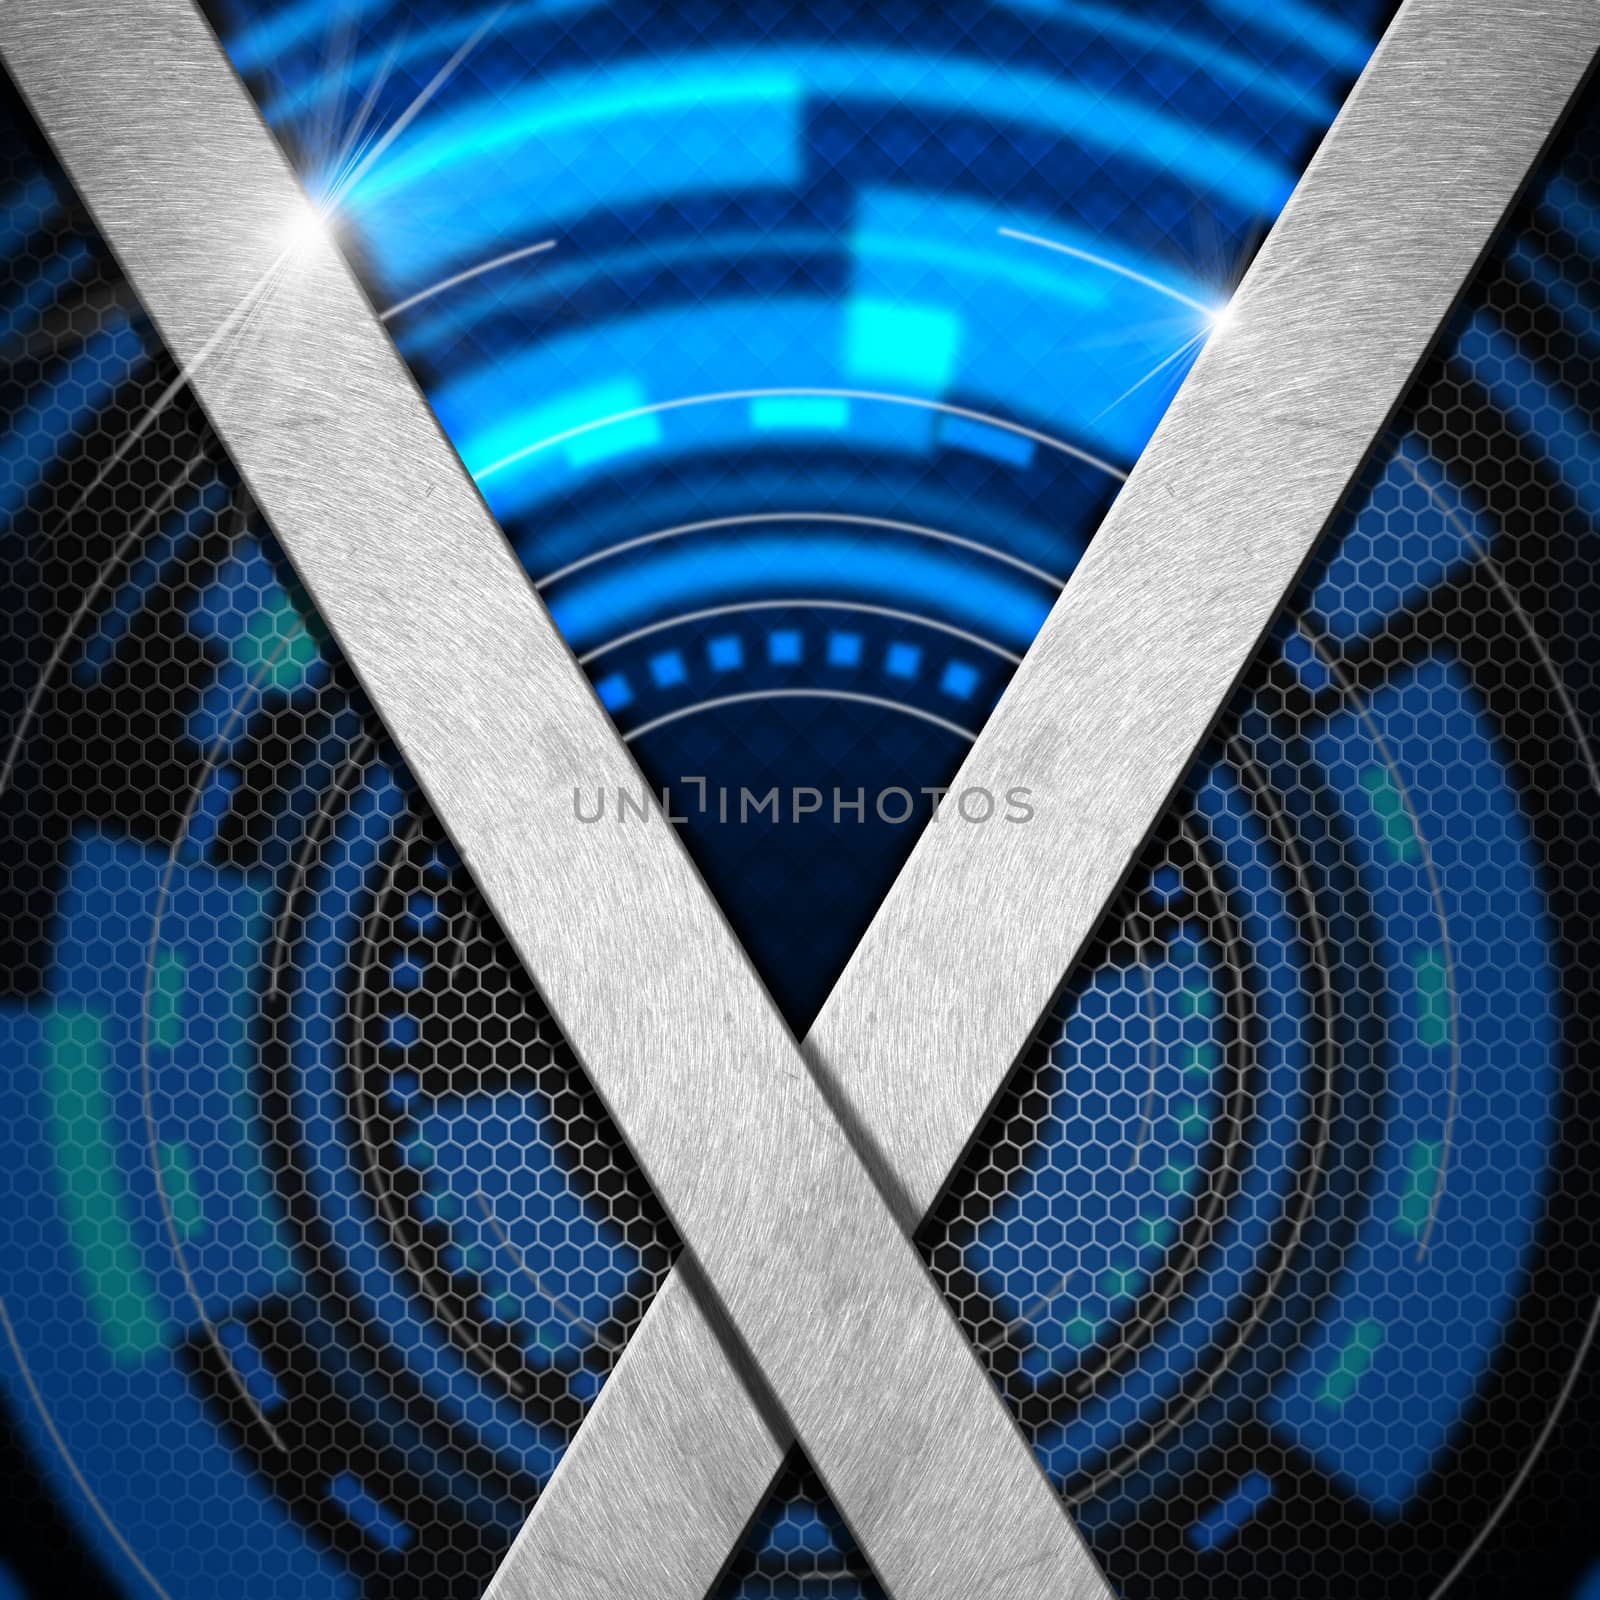 Blue, black and metal abstract background, with metal cross and bright areas